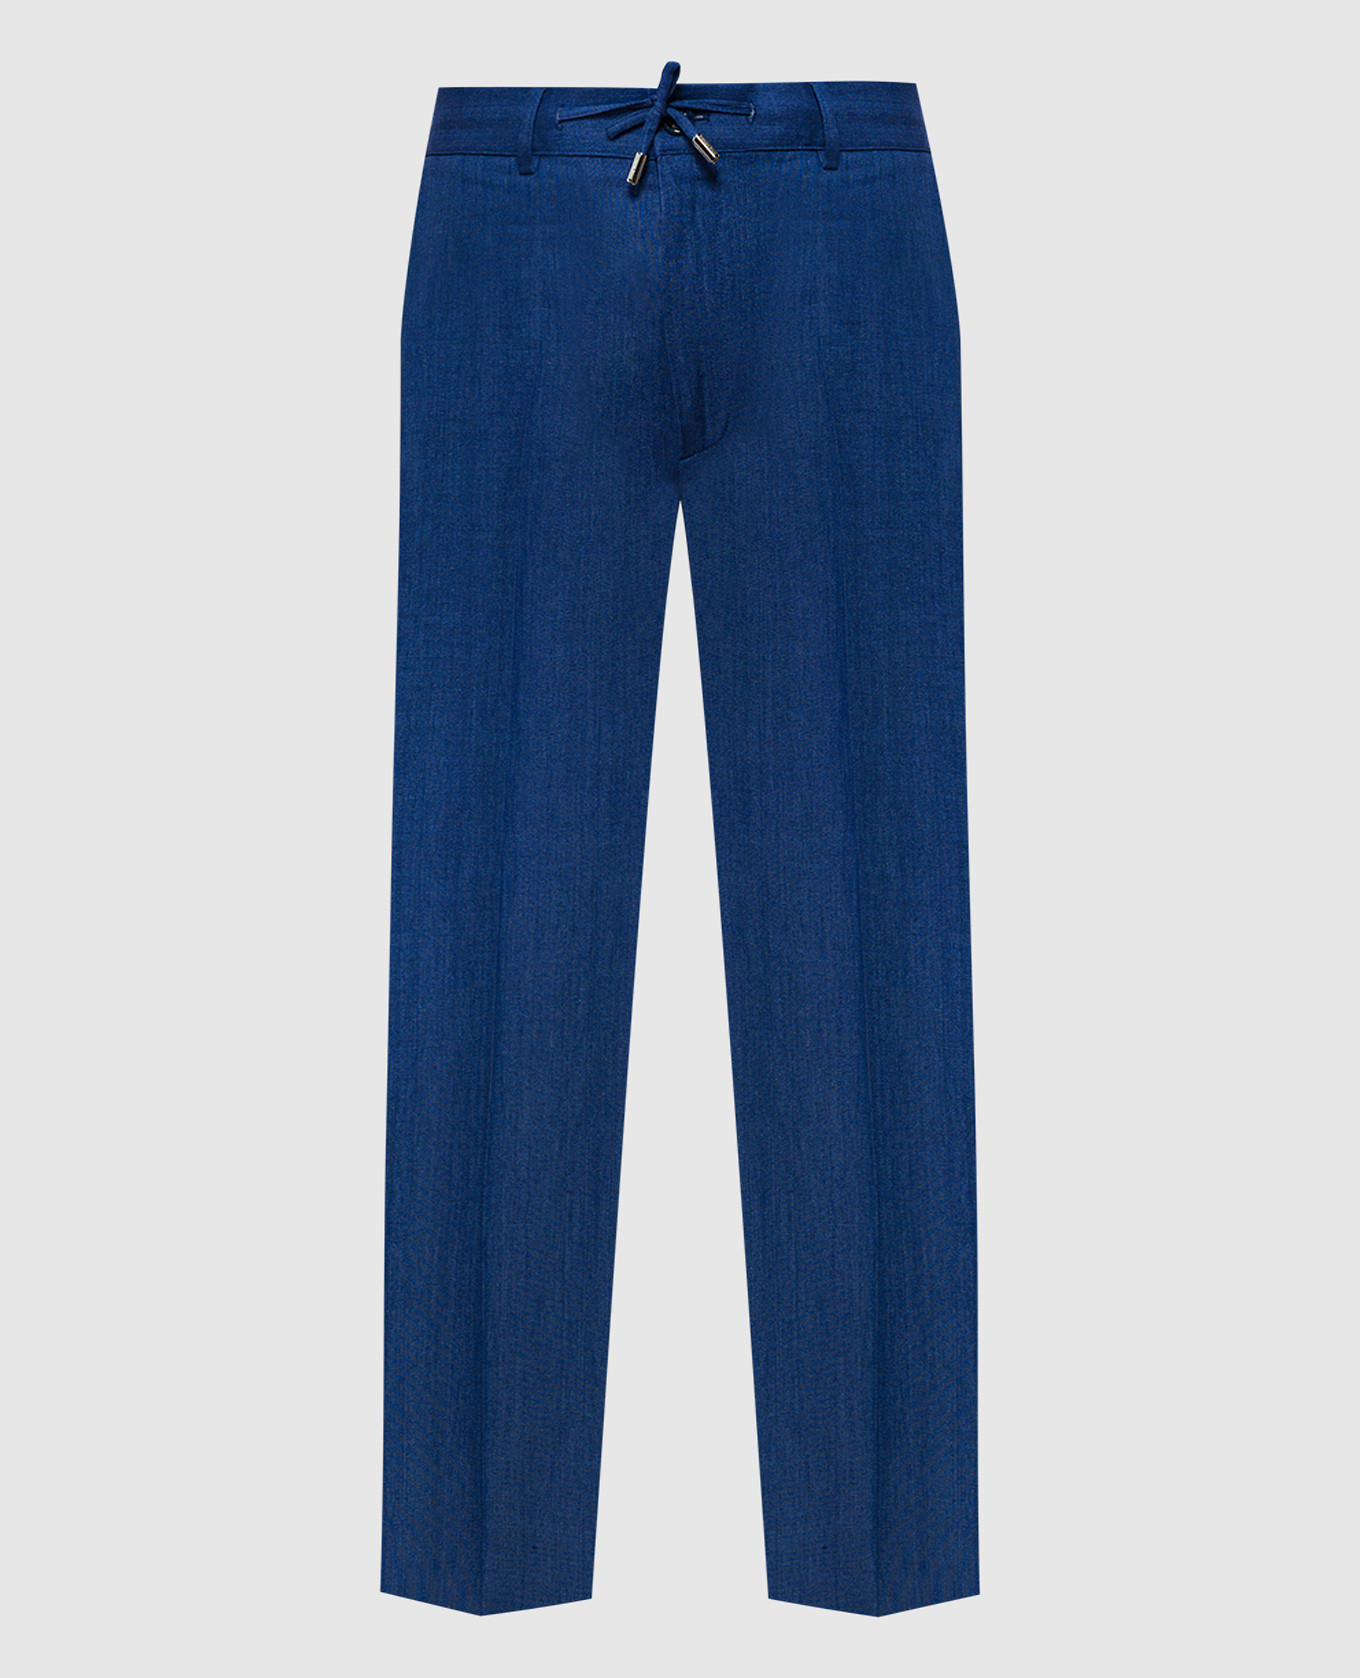 Blue linen trousers with metallic logo